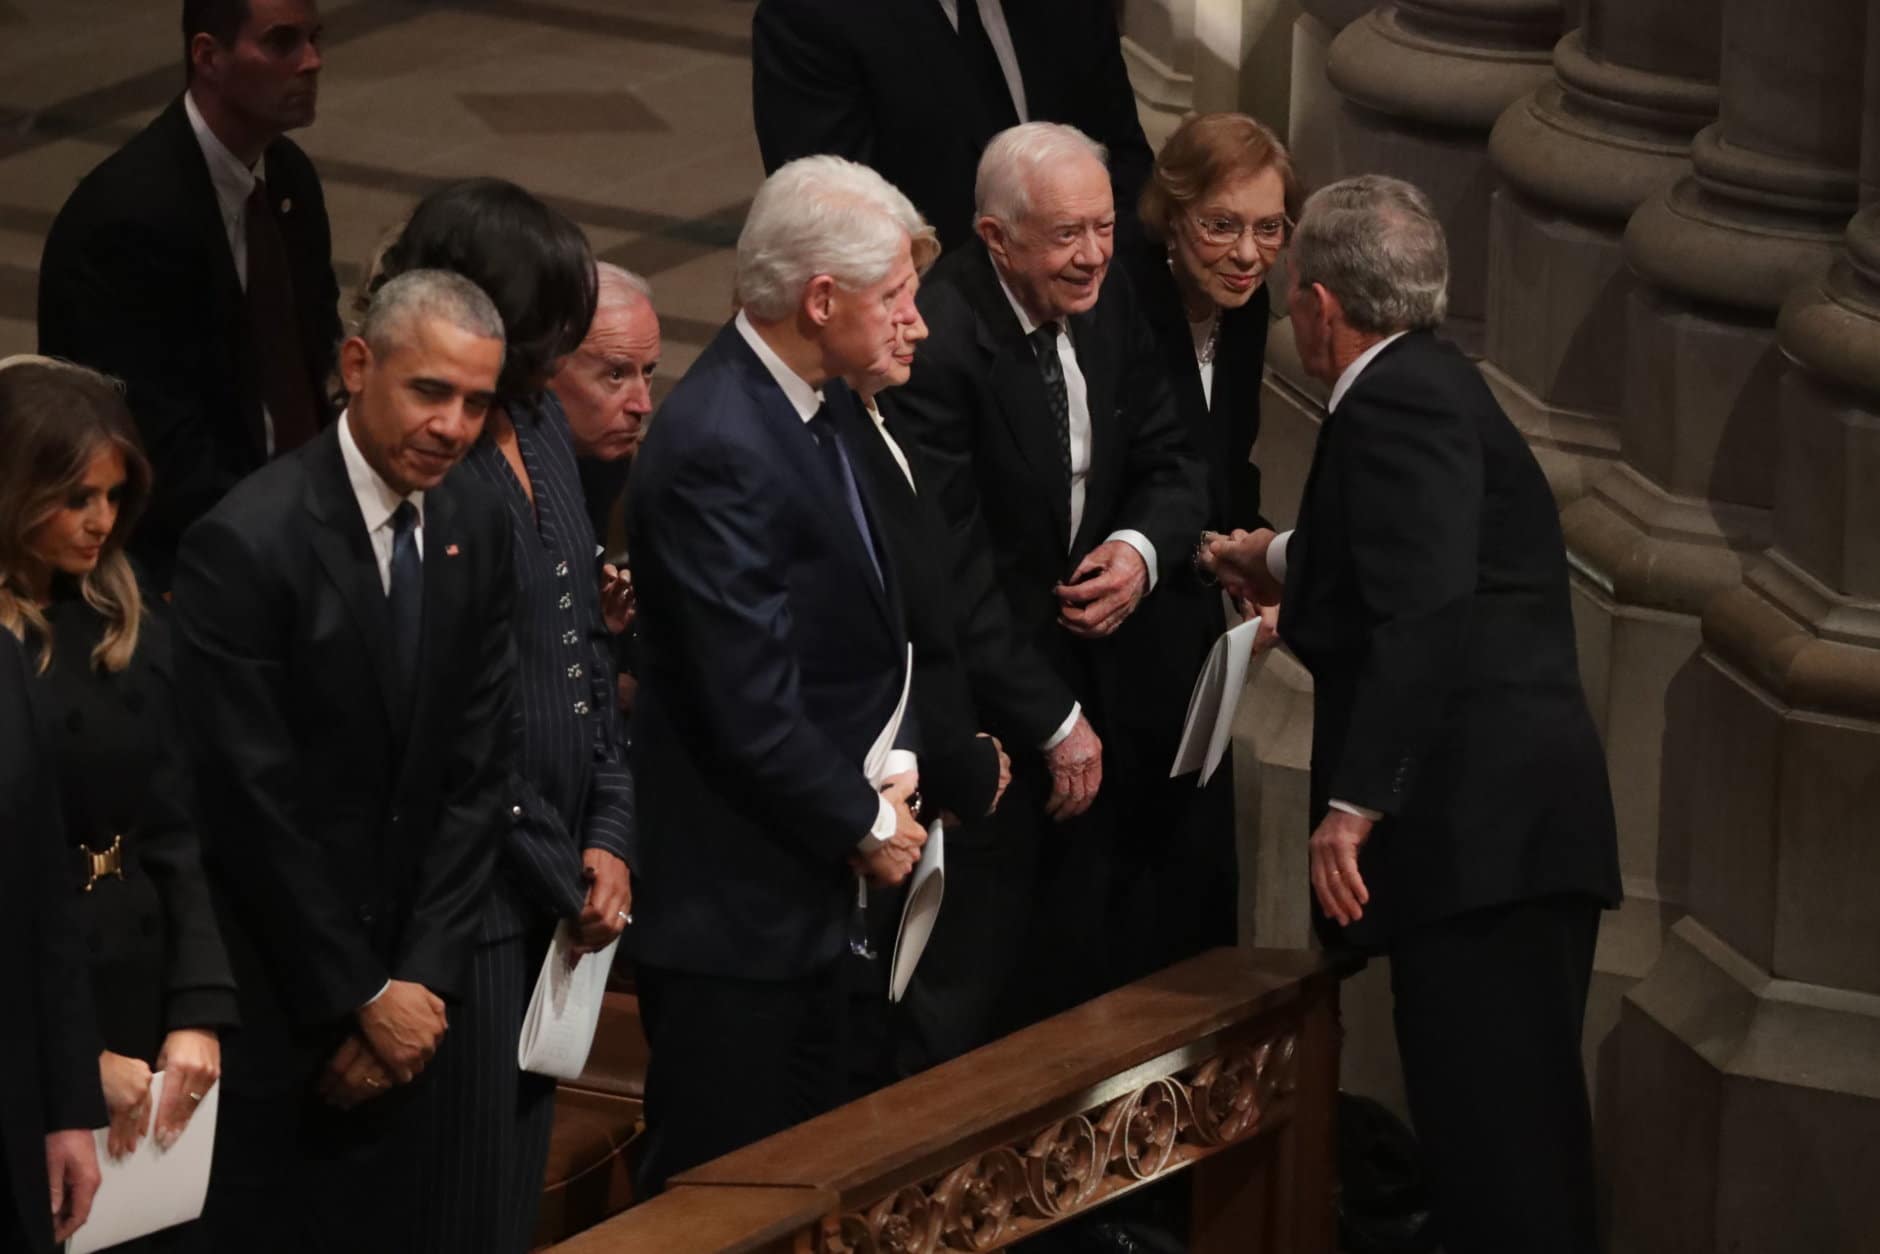 Former U.S. President George W. Bush (R) greets fellow former presidents Jimmy Carter, Bill Clinton and Barack Obama and first ladies Rosalynn Carter, Hillary Clinton, Michelle Obama and Melania Trump during the state funeral for his father and former President George H.W. Bush at the National Cathedral December 05, 2018 in Washington, DC. A WWII combat veteran, Bush served as a member of Congress from Texas, ambassador to the United Nations, director of the CIA, vice president and 41st president of the United States.  (Photo by Chip Somodevilla/Getty Images)